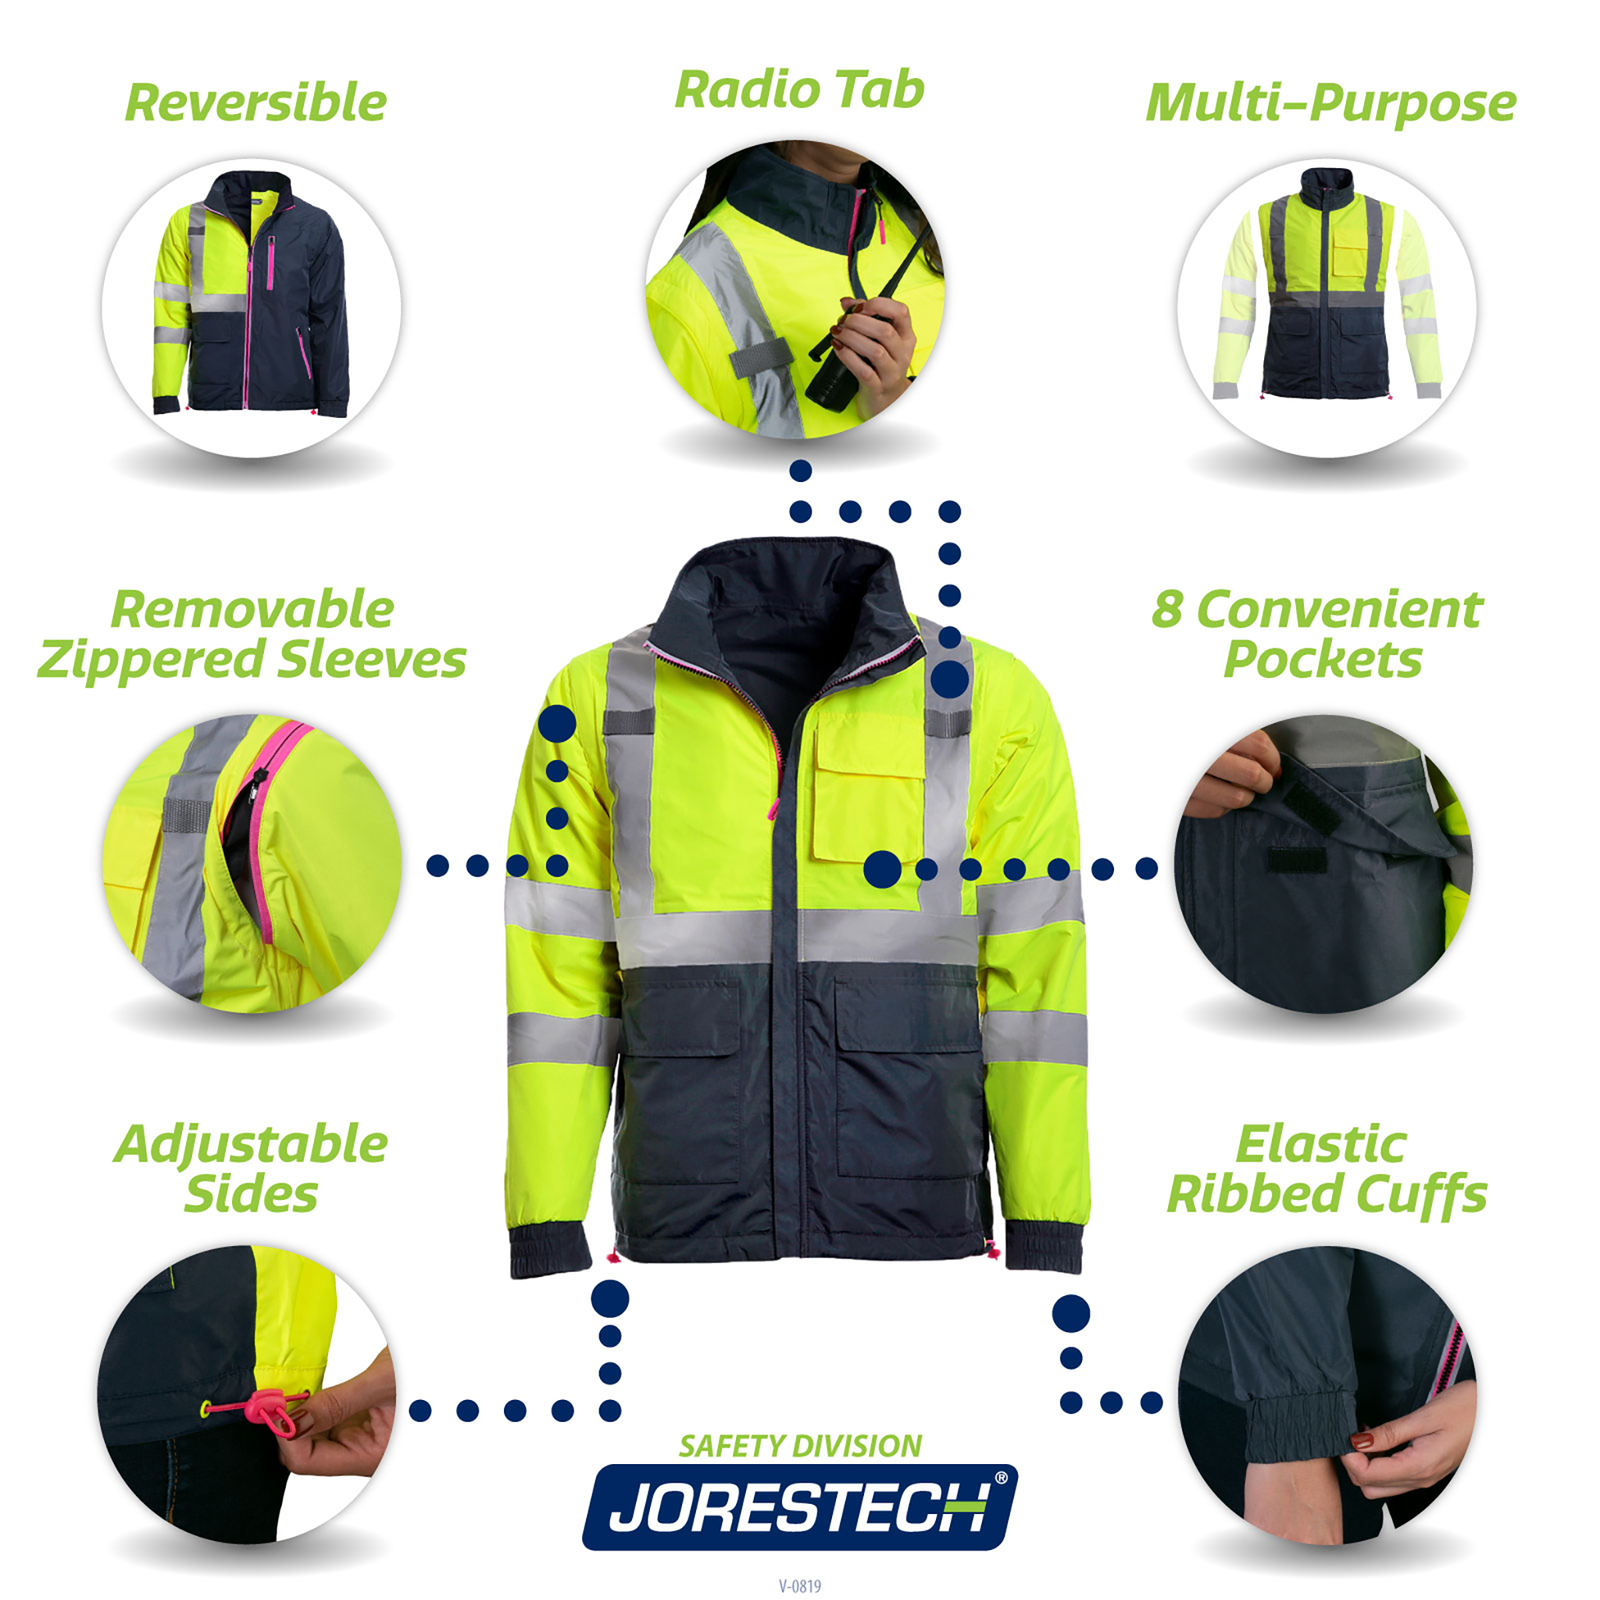 Several call outs describing the 4 in 1 reversible JORESTECH safety jacket with removable sleeves and pink zippers. Text reads:  Reversible, Removable zippered sleeves, Adjustable sides, Elastic Ribbed cuffs, 8 convenient pockets multipurpose use, radio tab